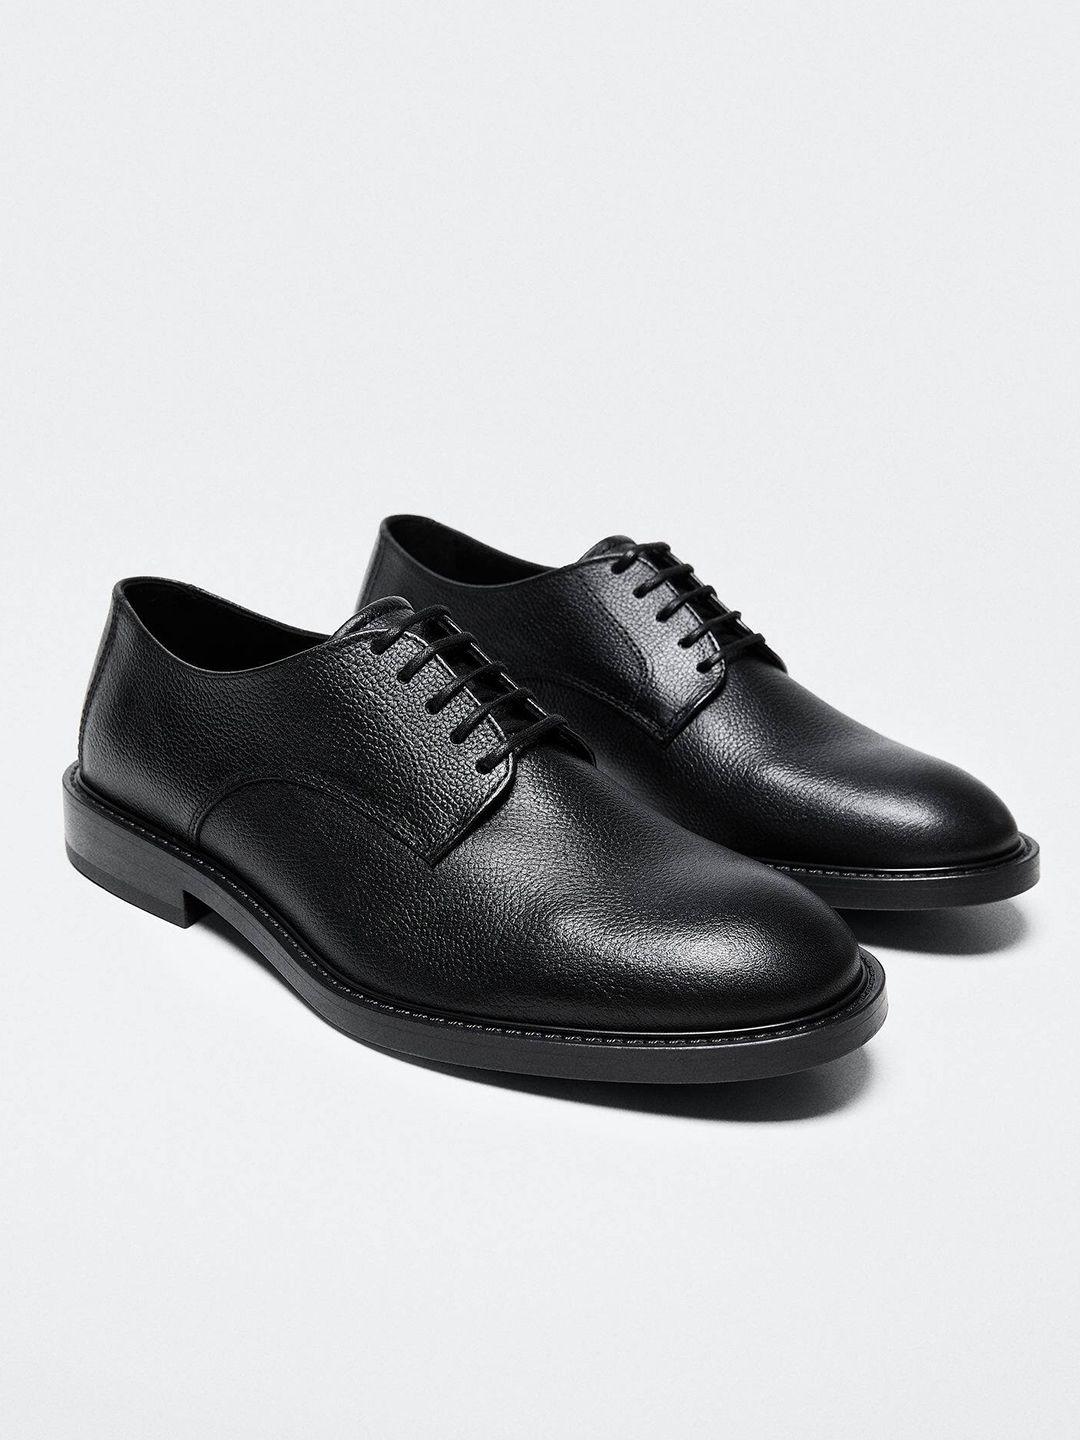 mango-man-textured-leather-sustainable-formal-derbys